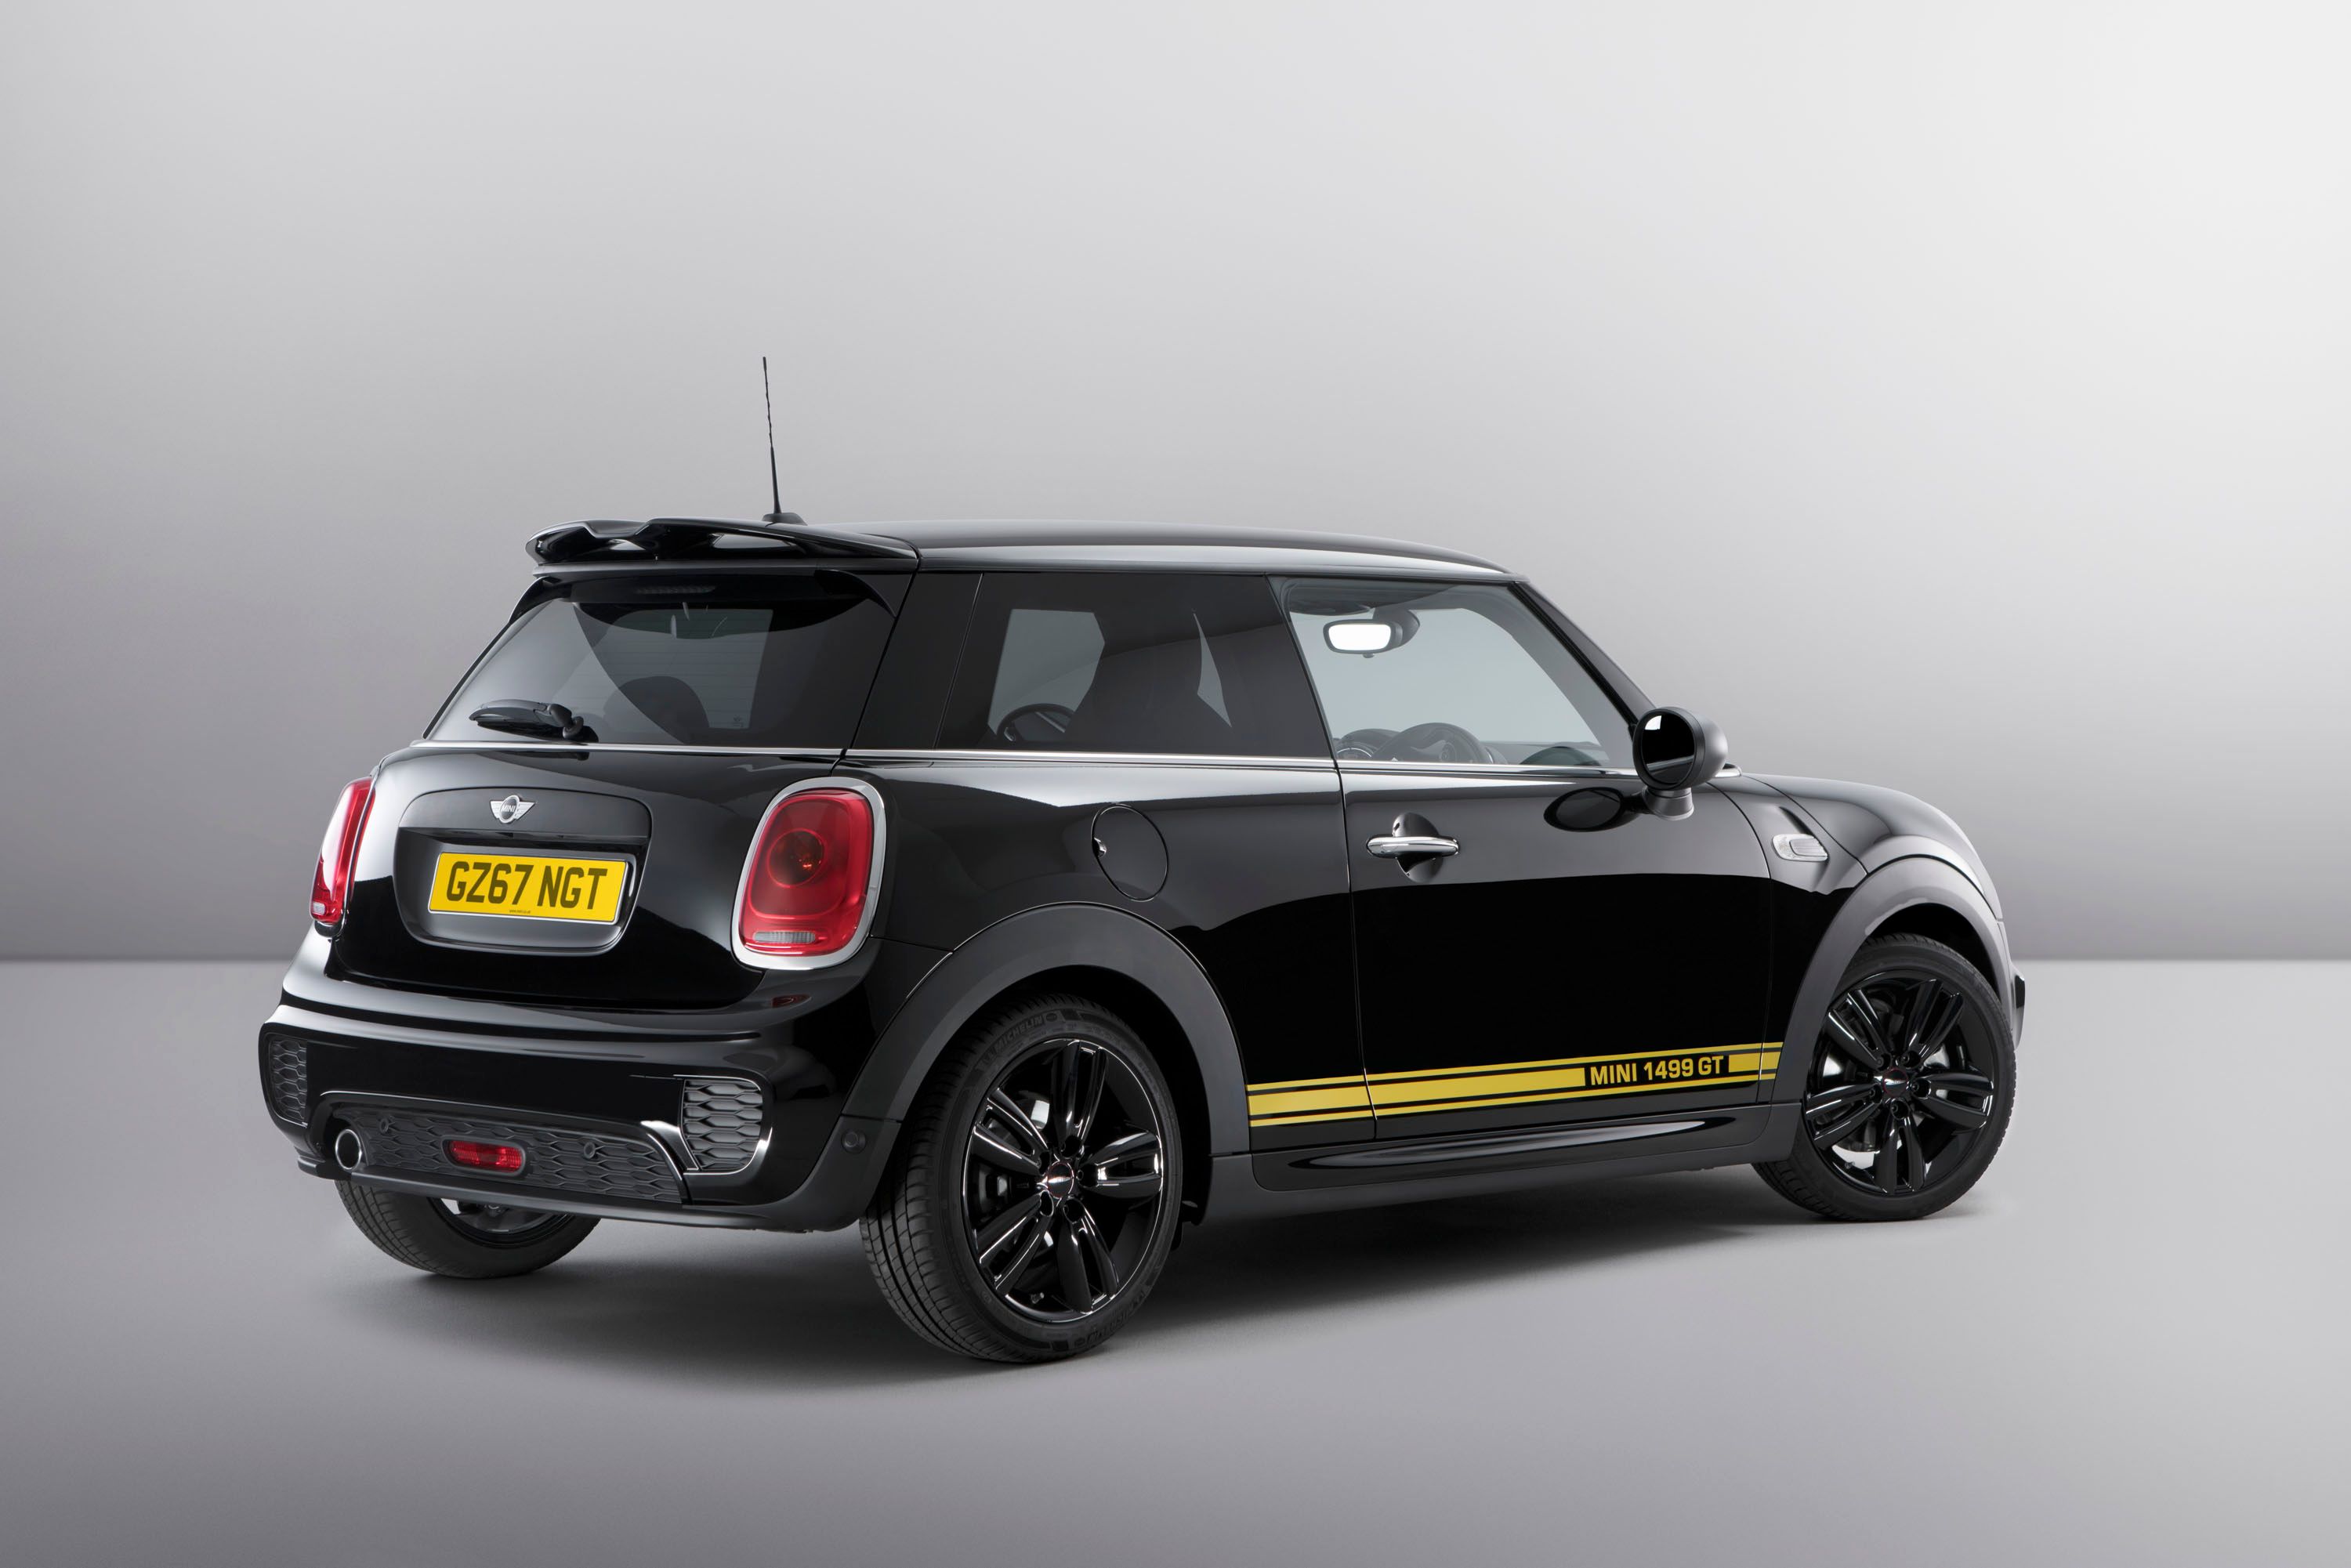  Mini Cooper 1499 GT in Midnight Black with gold side stripes